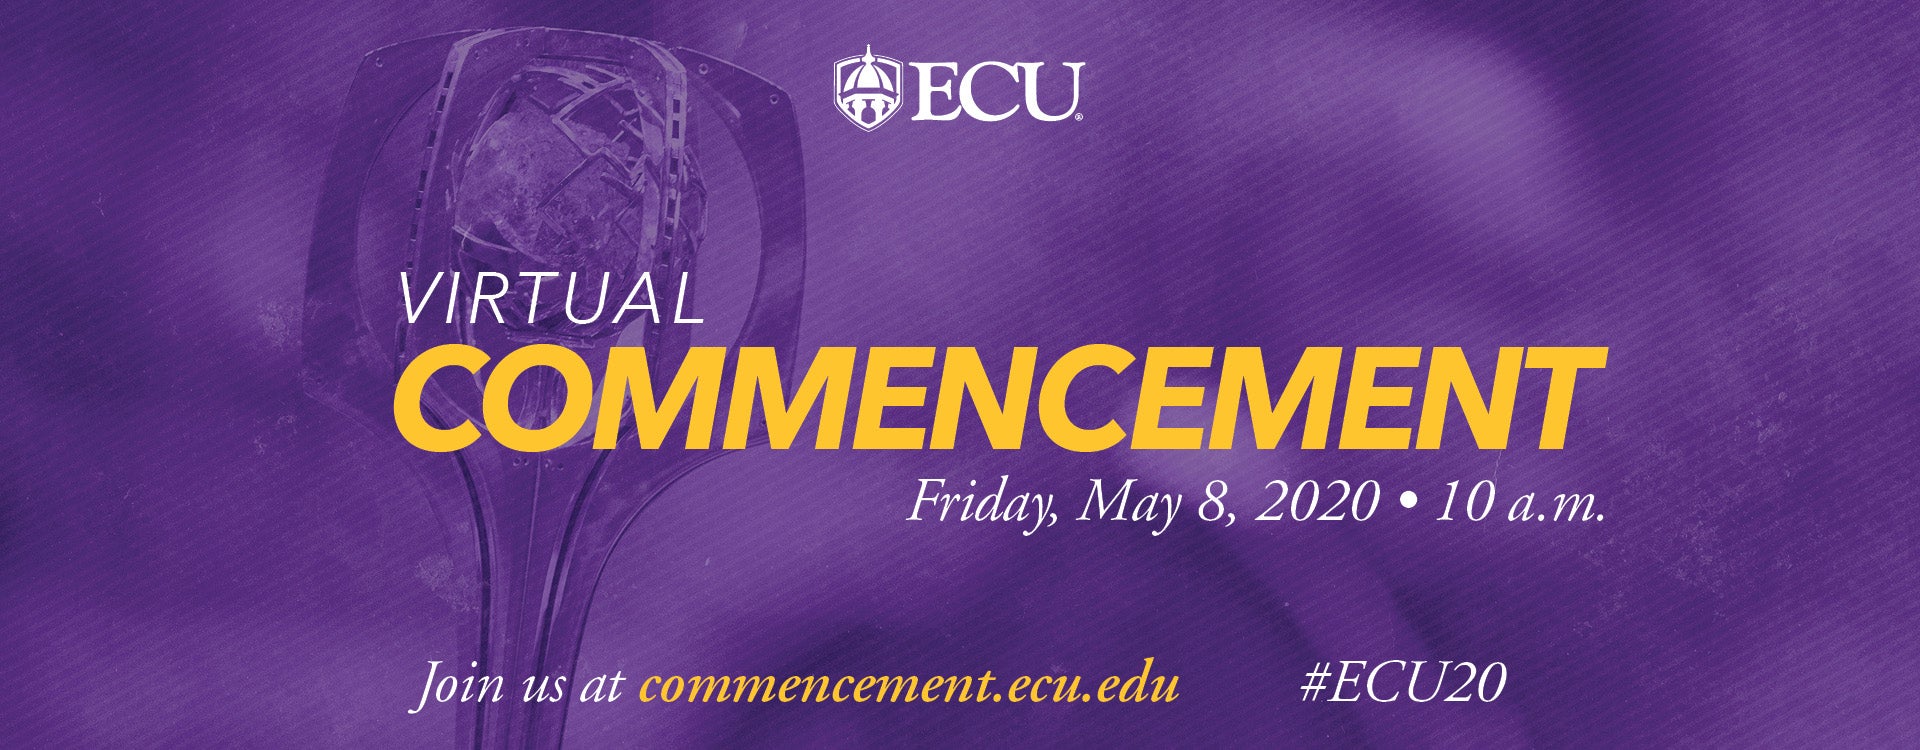 Join us for virtual commencement 10 a.m. May 8 at commencement.ecu.edu